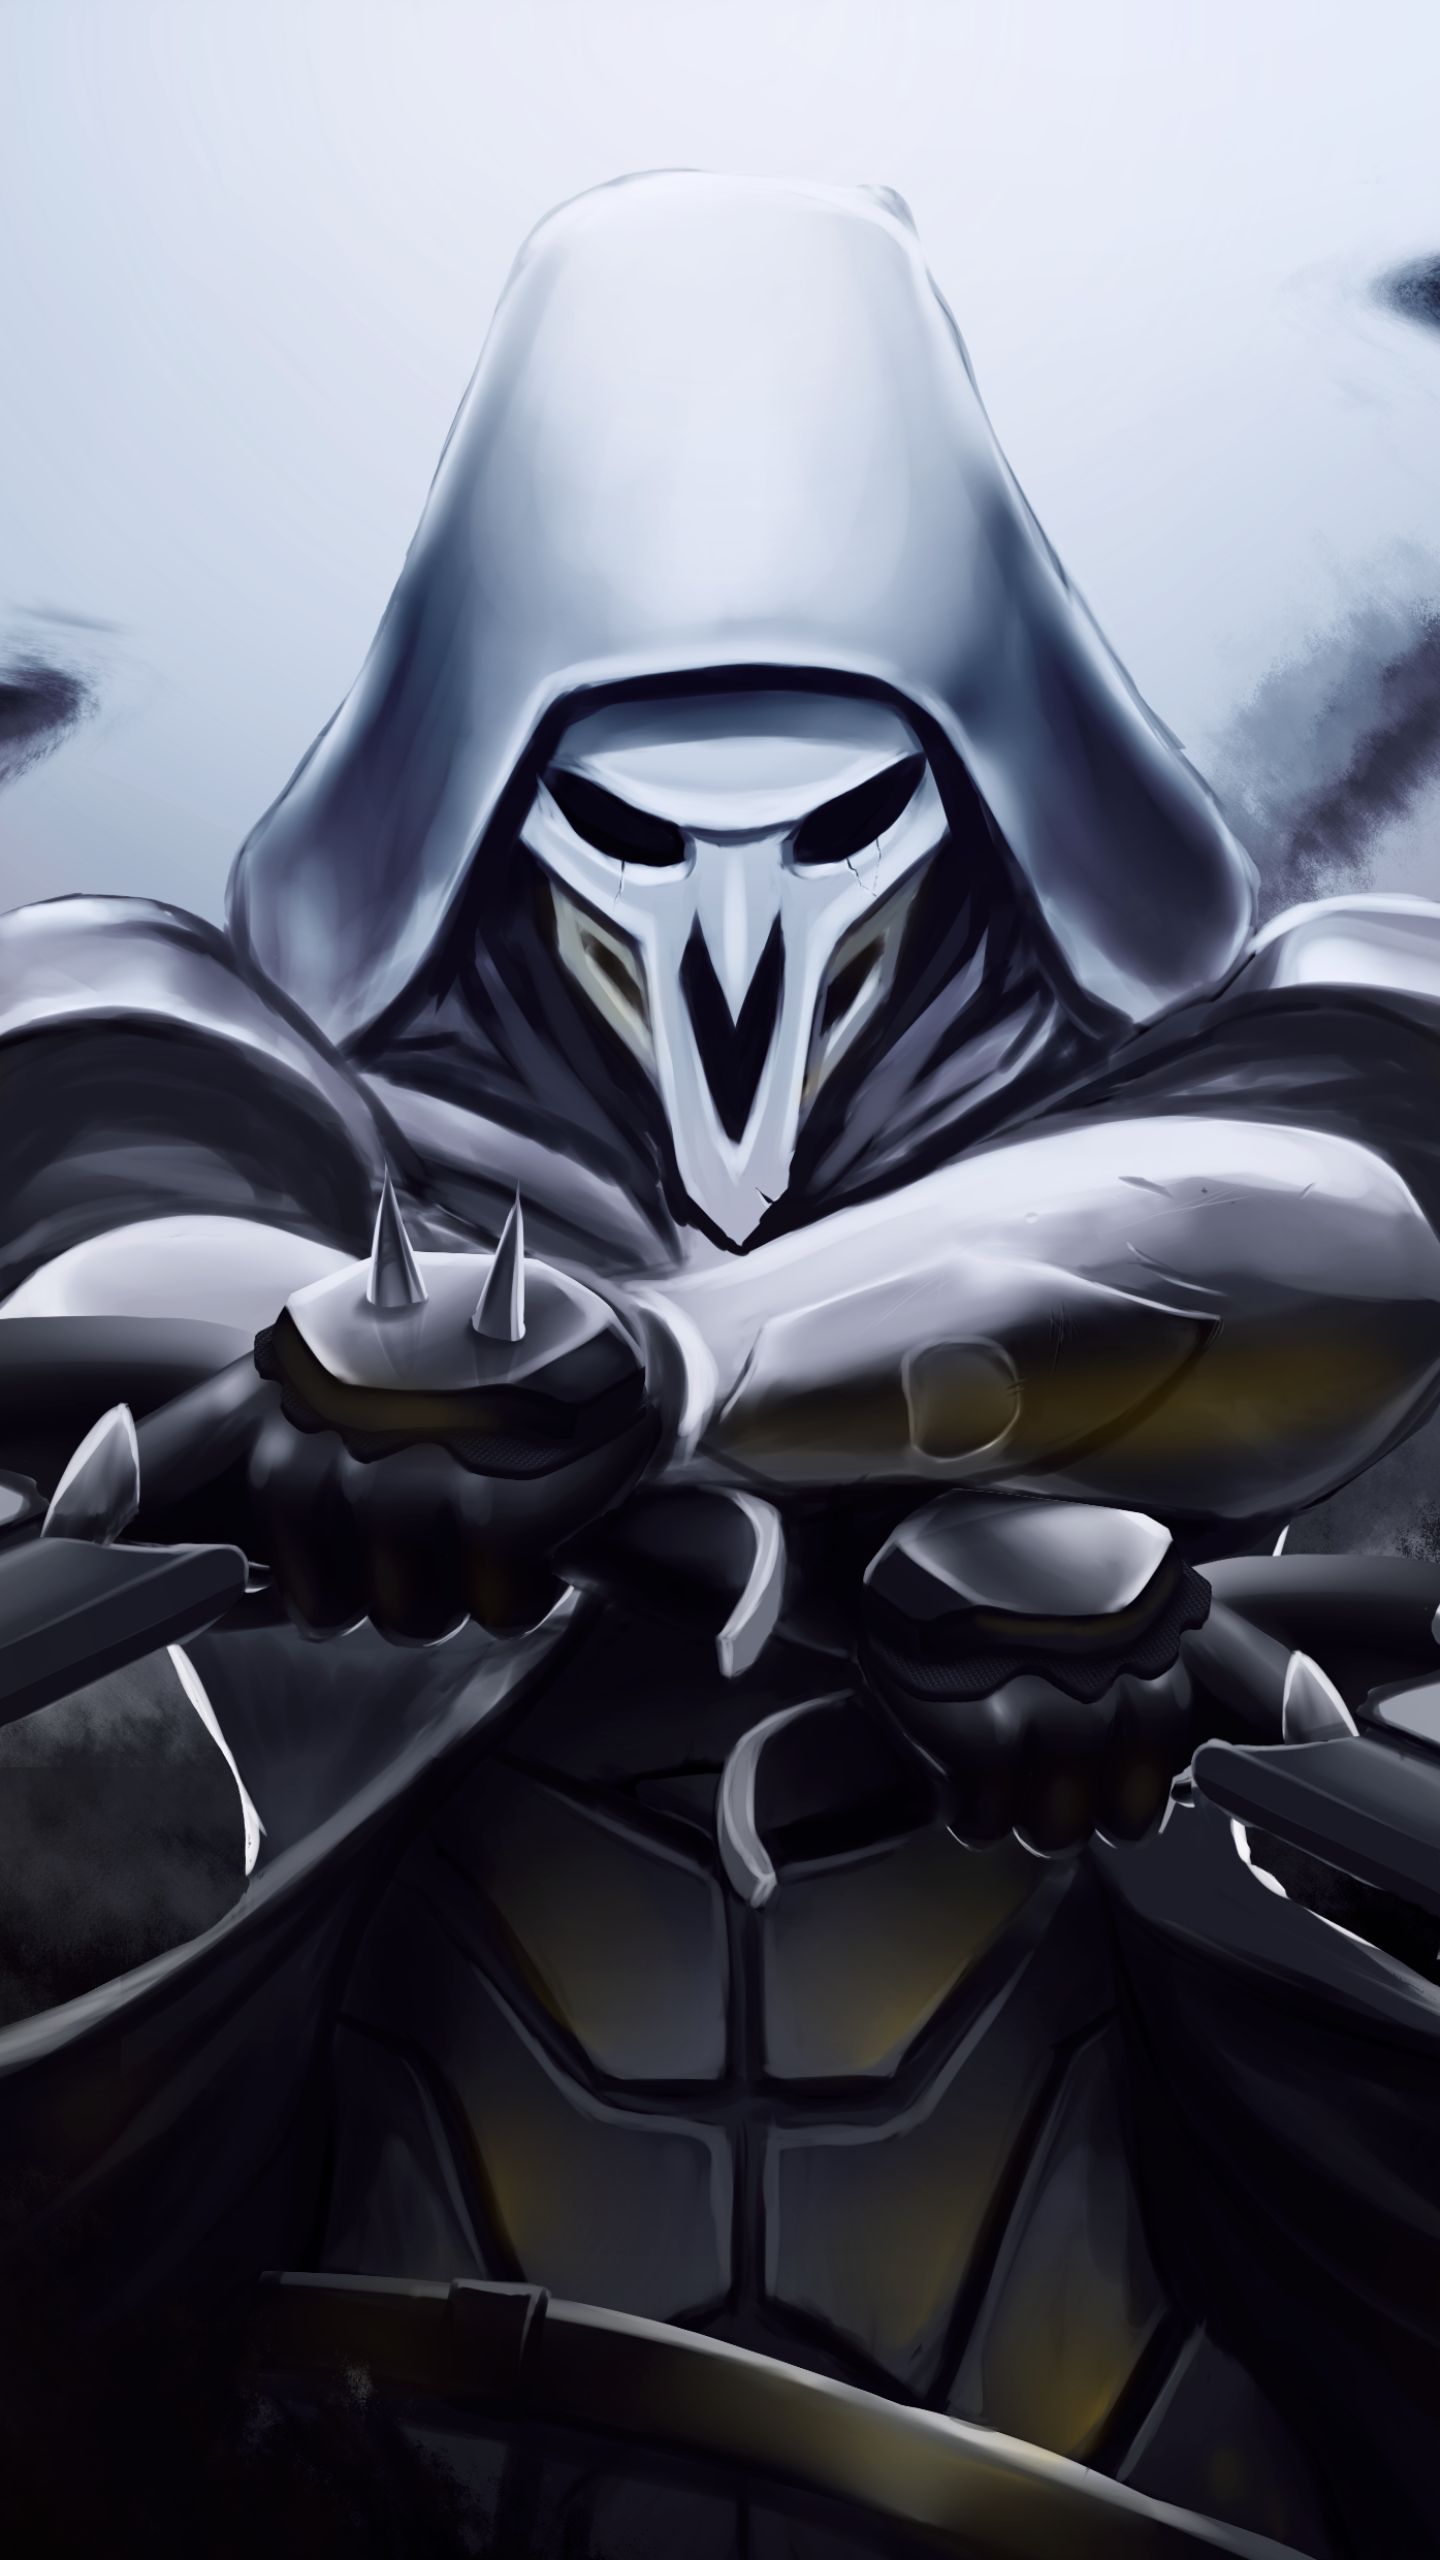 Overwatch Reaper Wallpapers 83 images